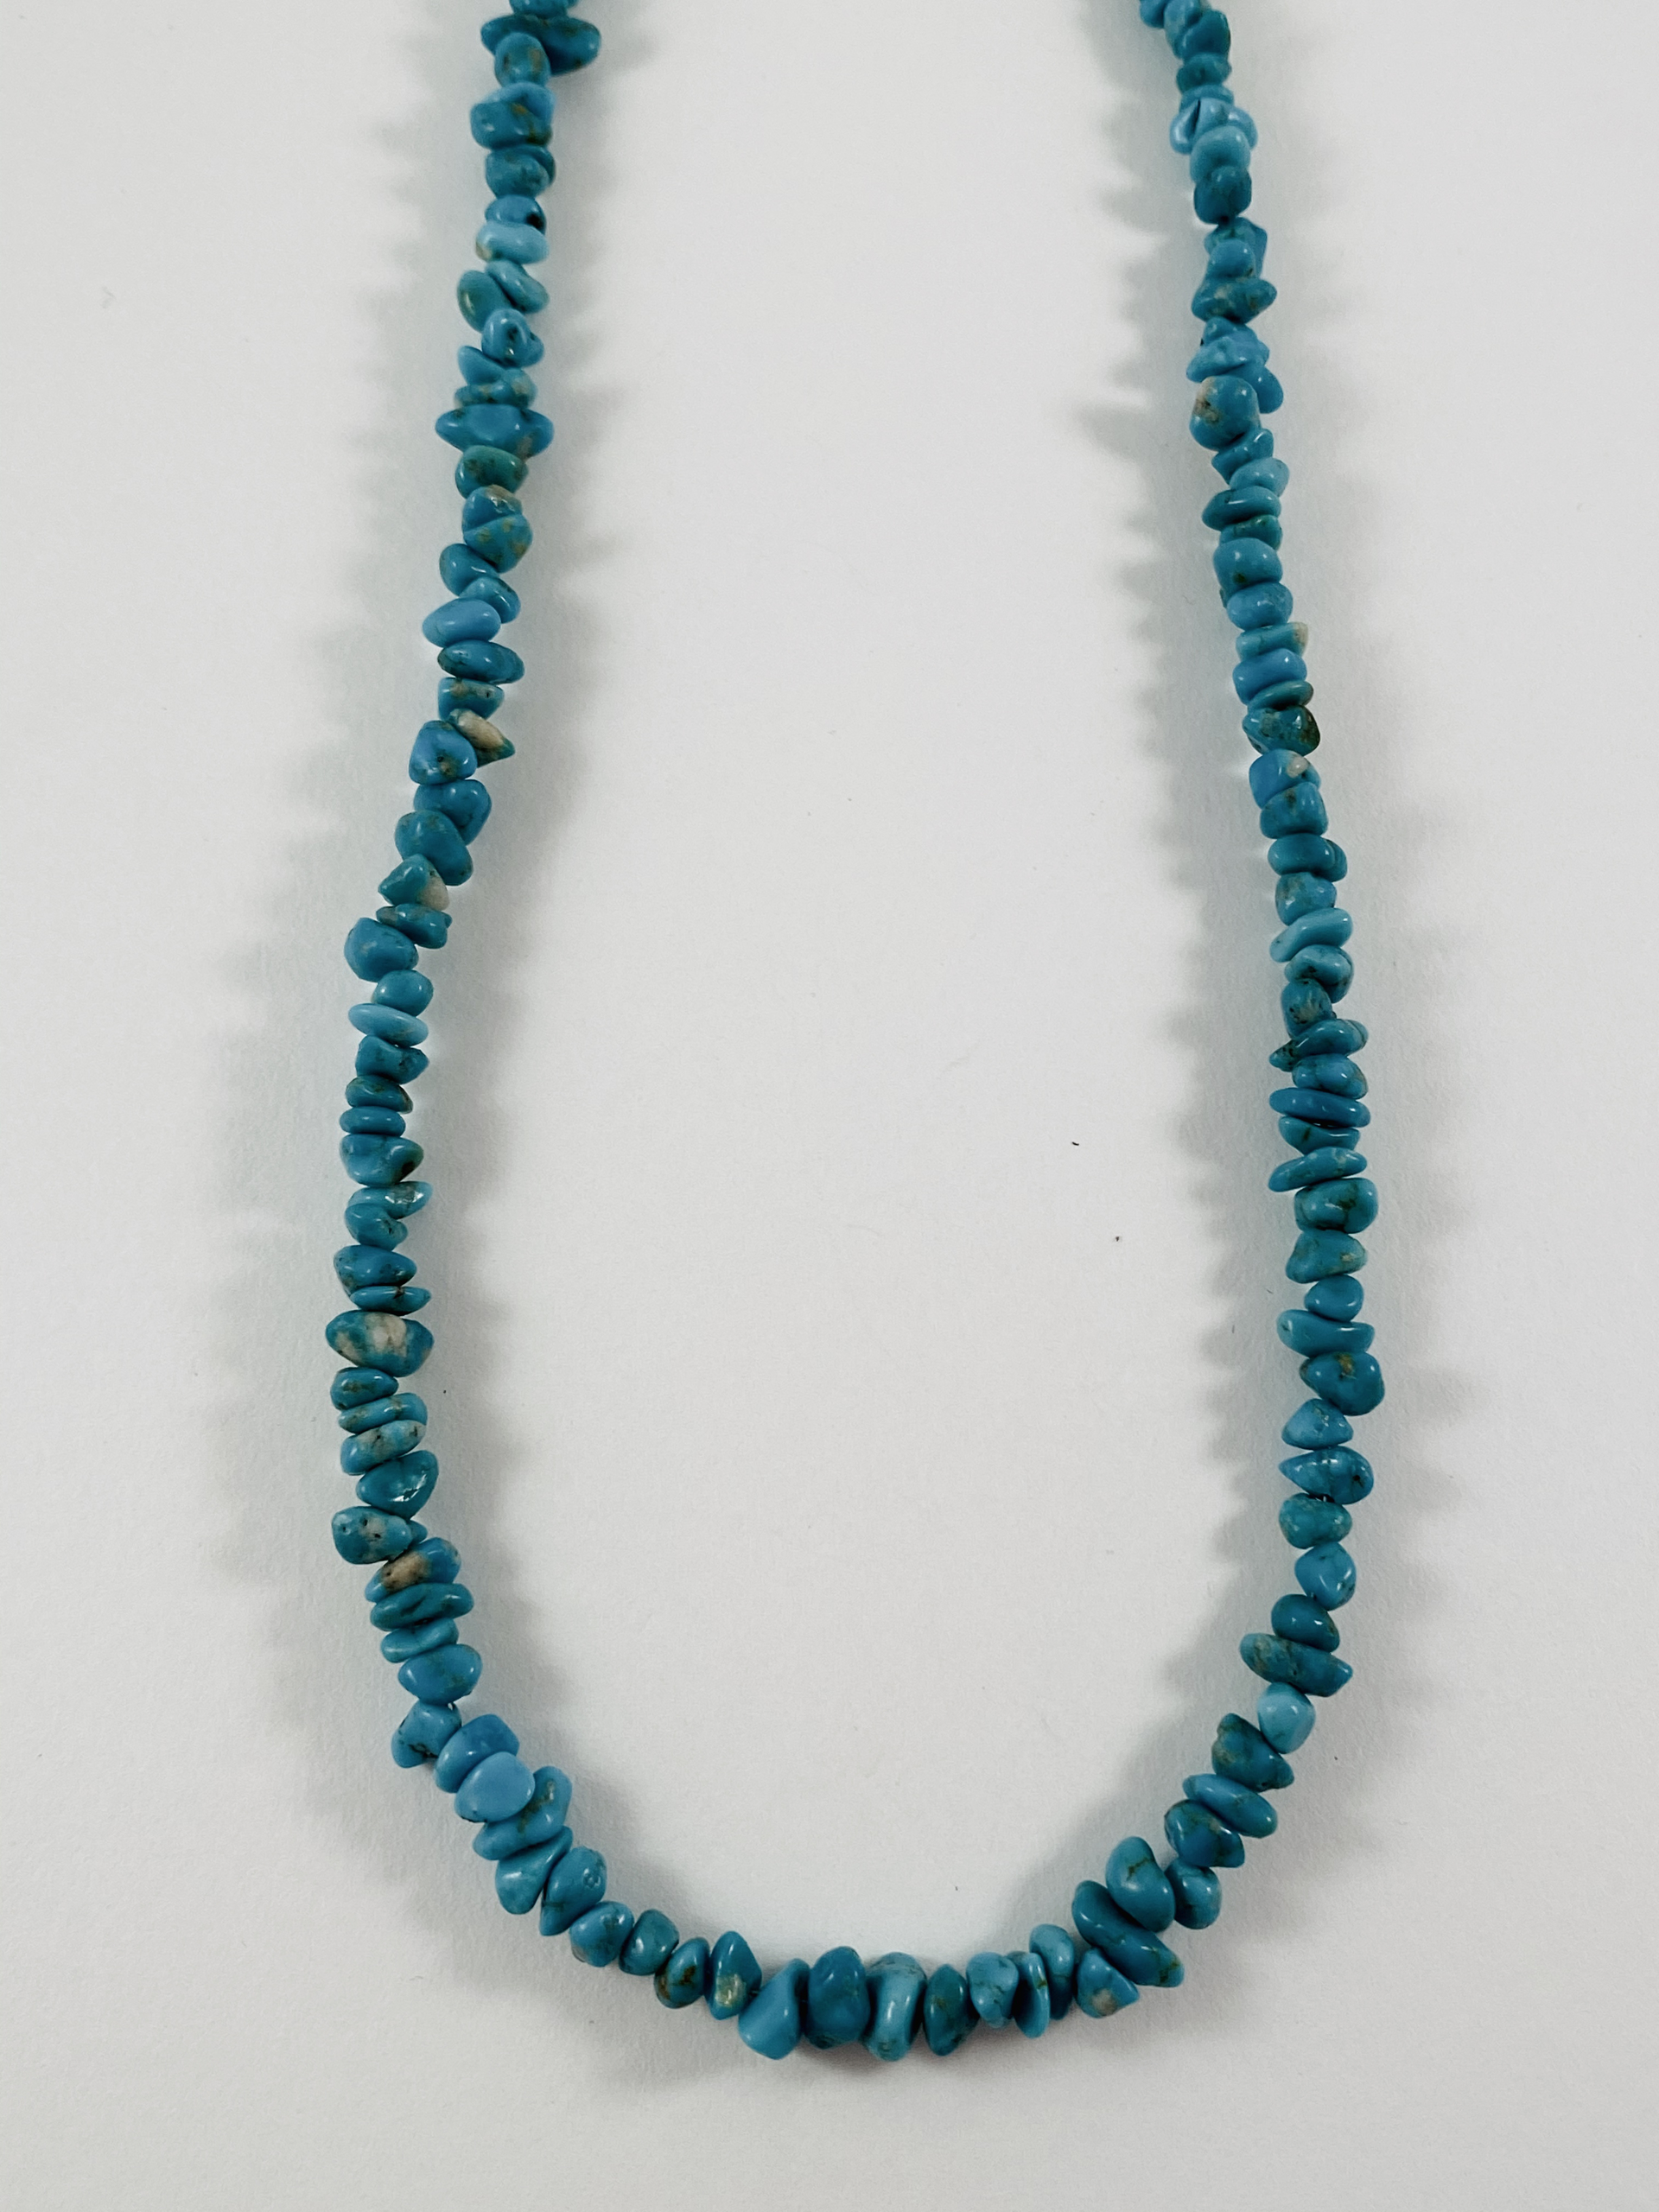 Blue Turquoise  Chunk Strand Necklace by Nance Trueworthy